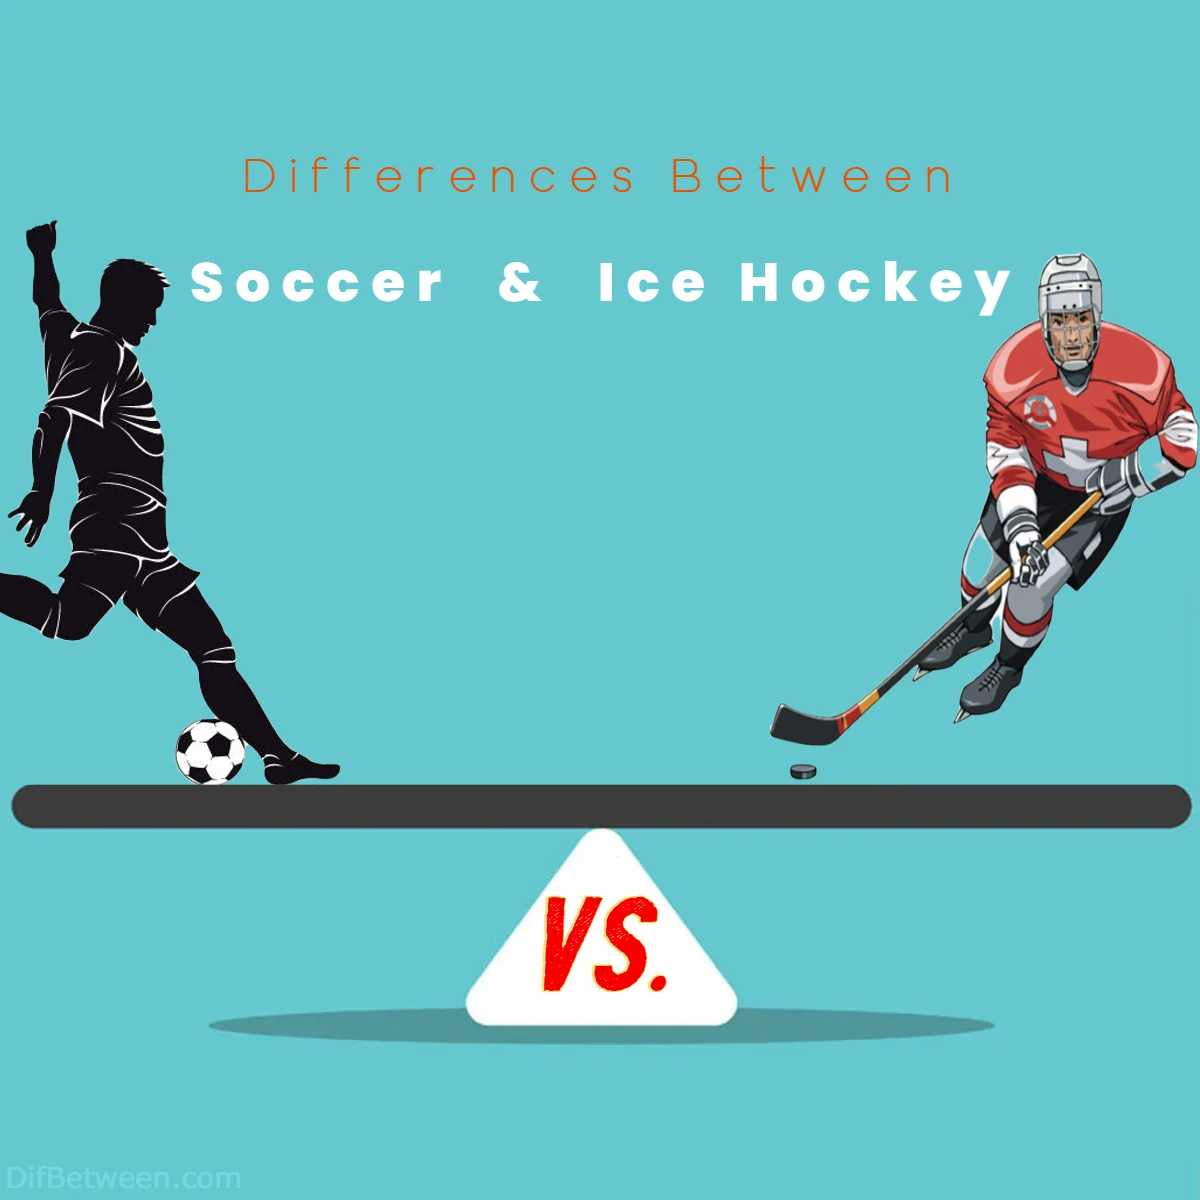 Differences Between Soccer vs Ice Hockey